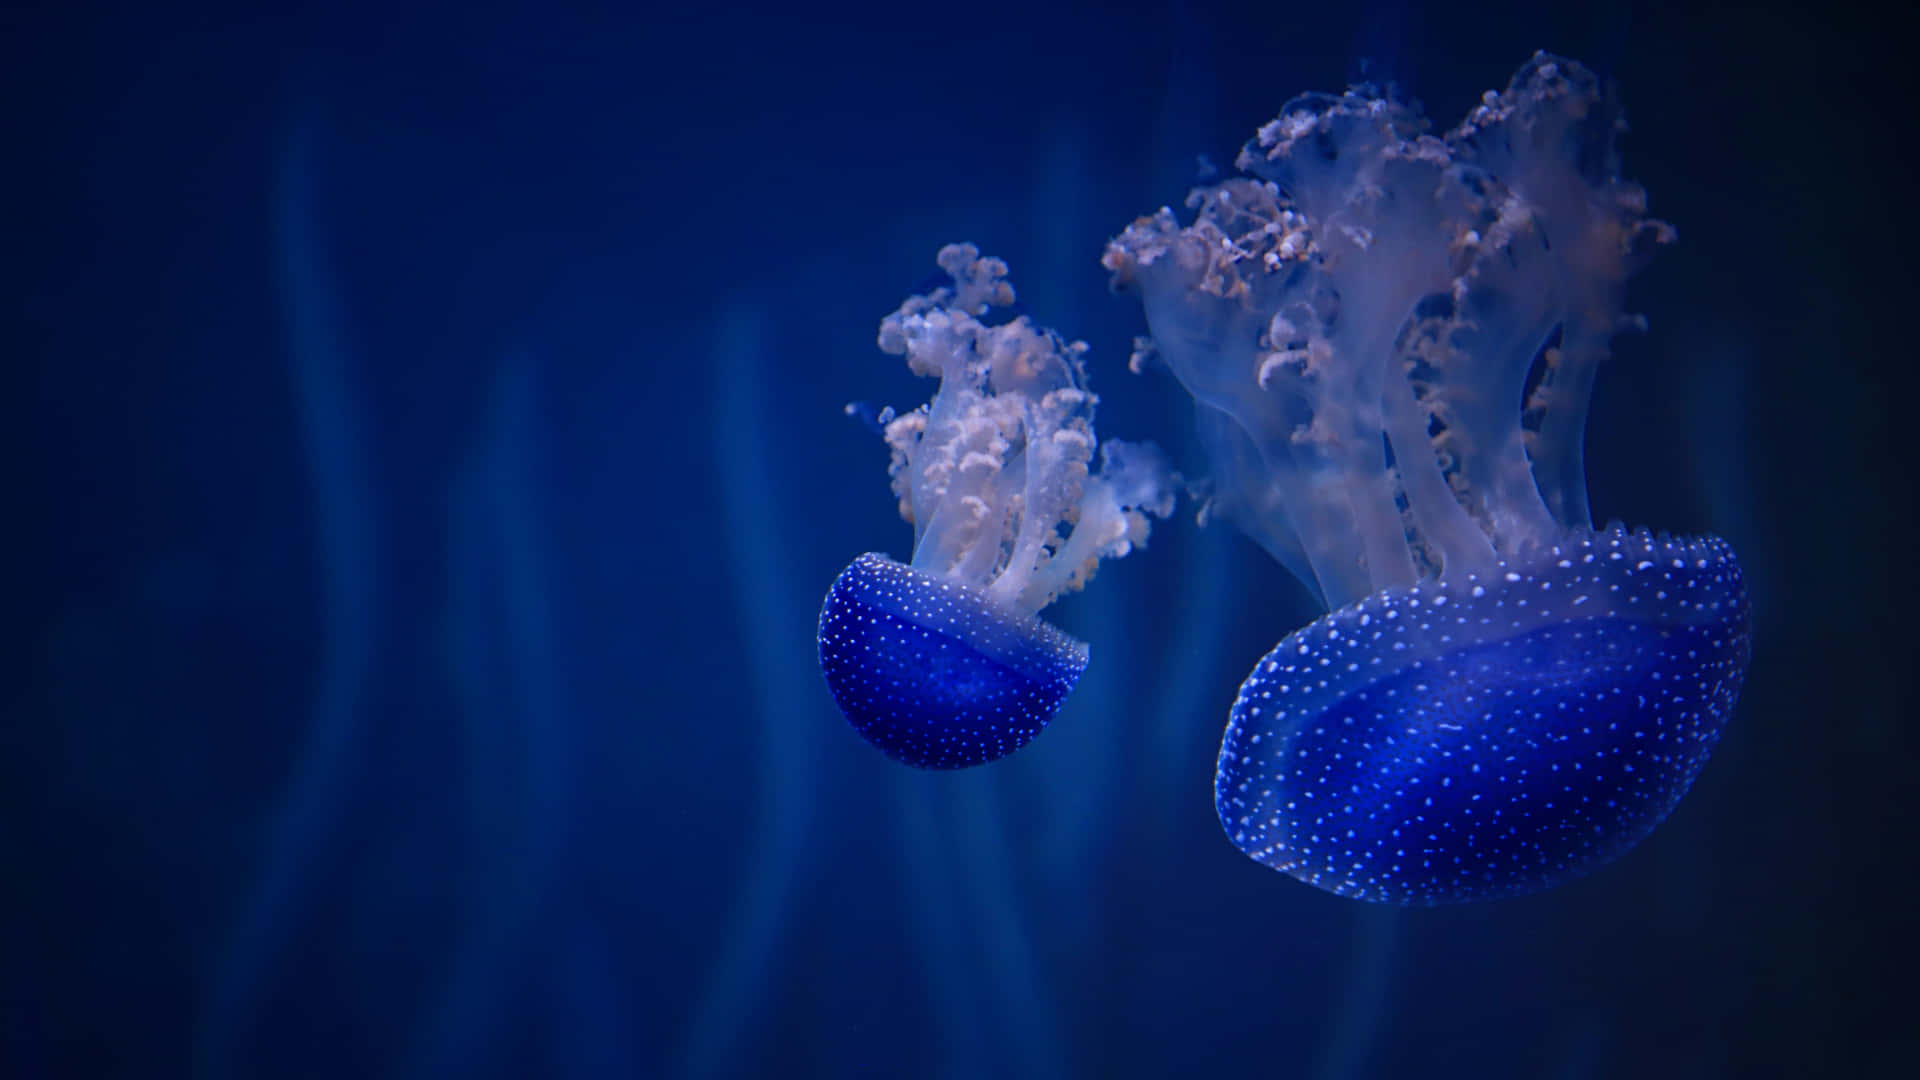 Two Jellyfish Swimming In The Ocean Wallpaper